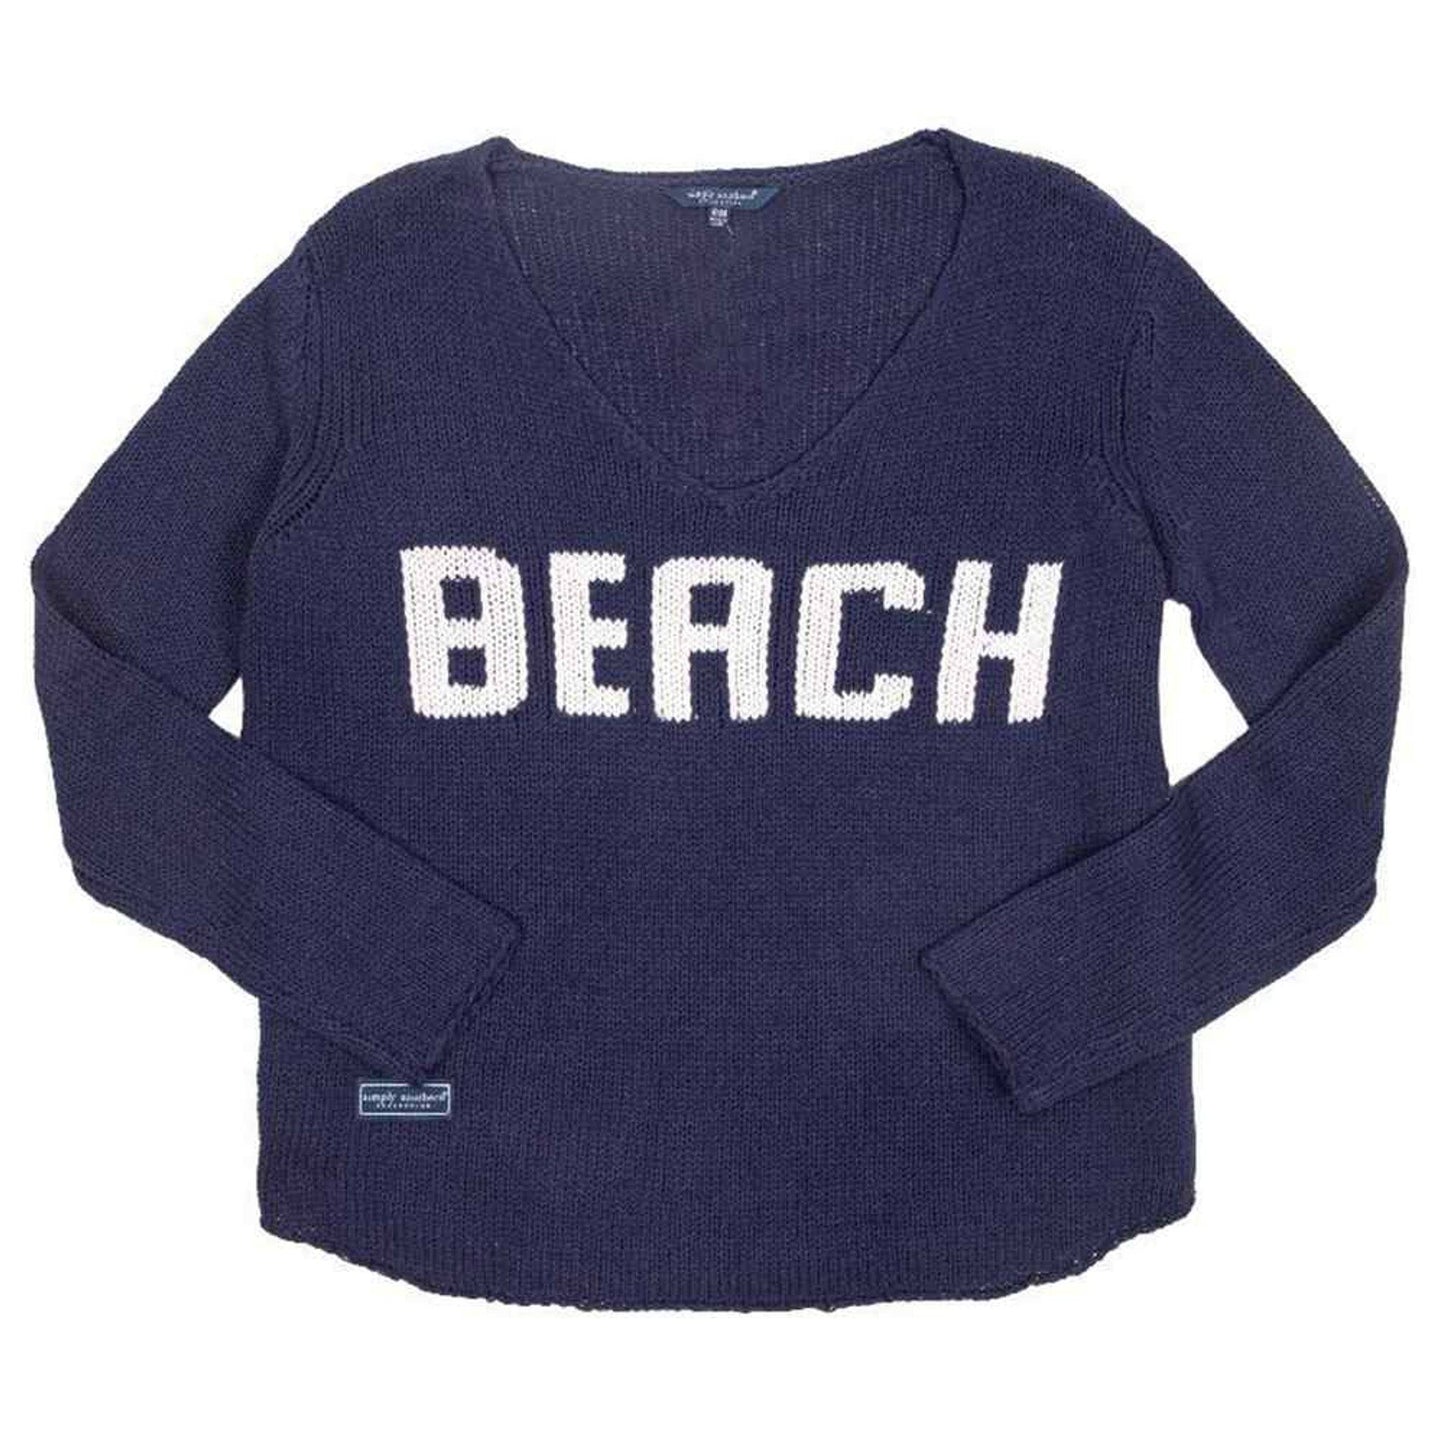 Simply Southern Everyday Beach Sweater for Women in Blue - Findlay Rowe Designs